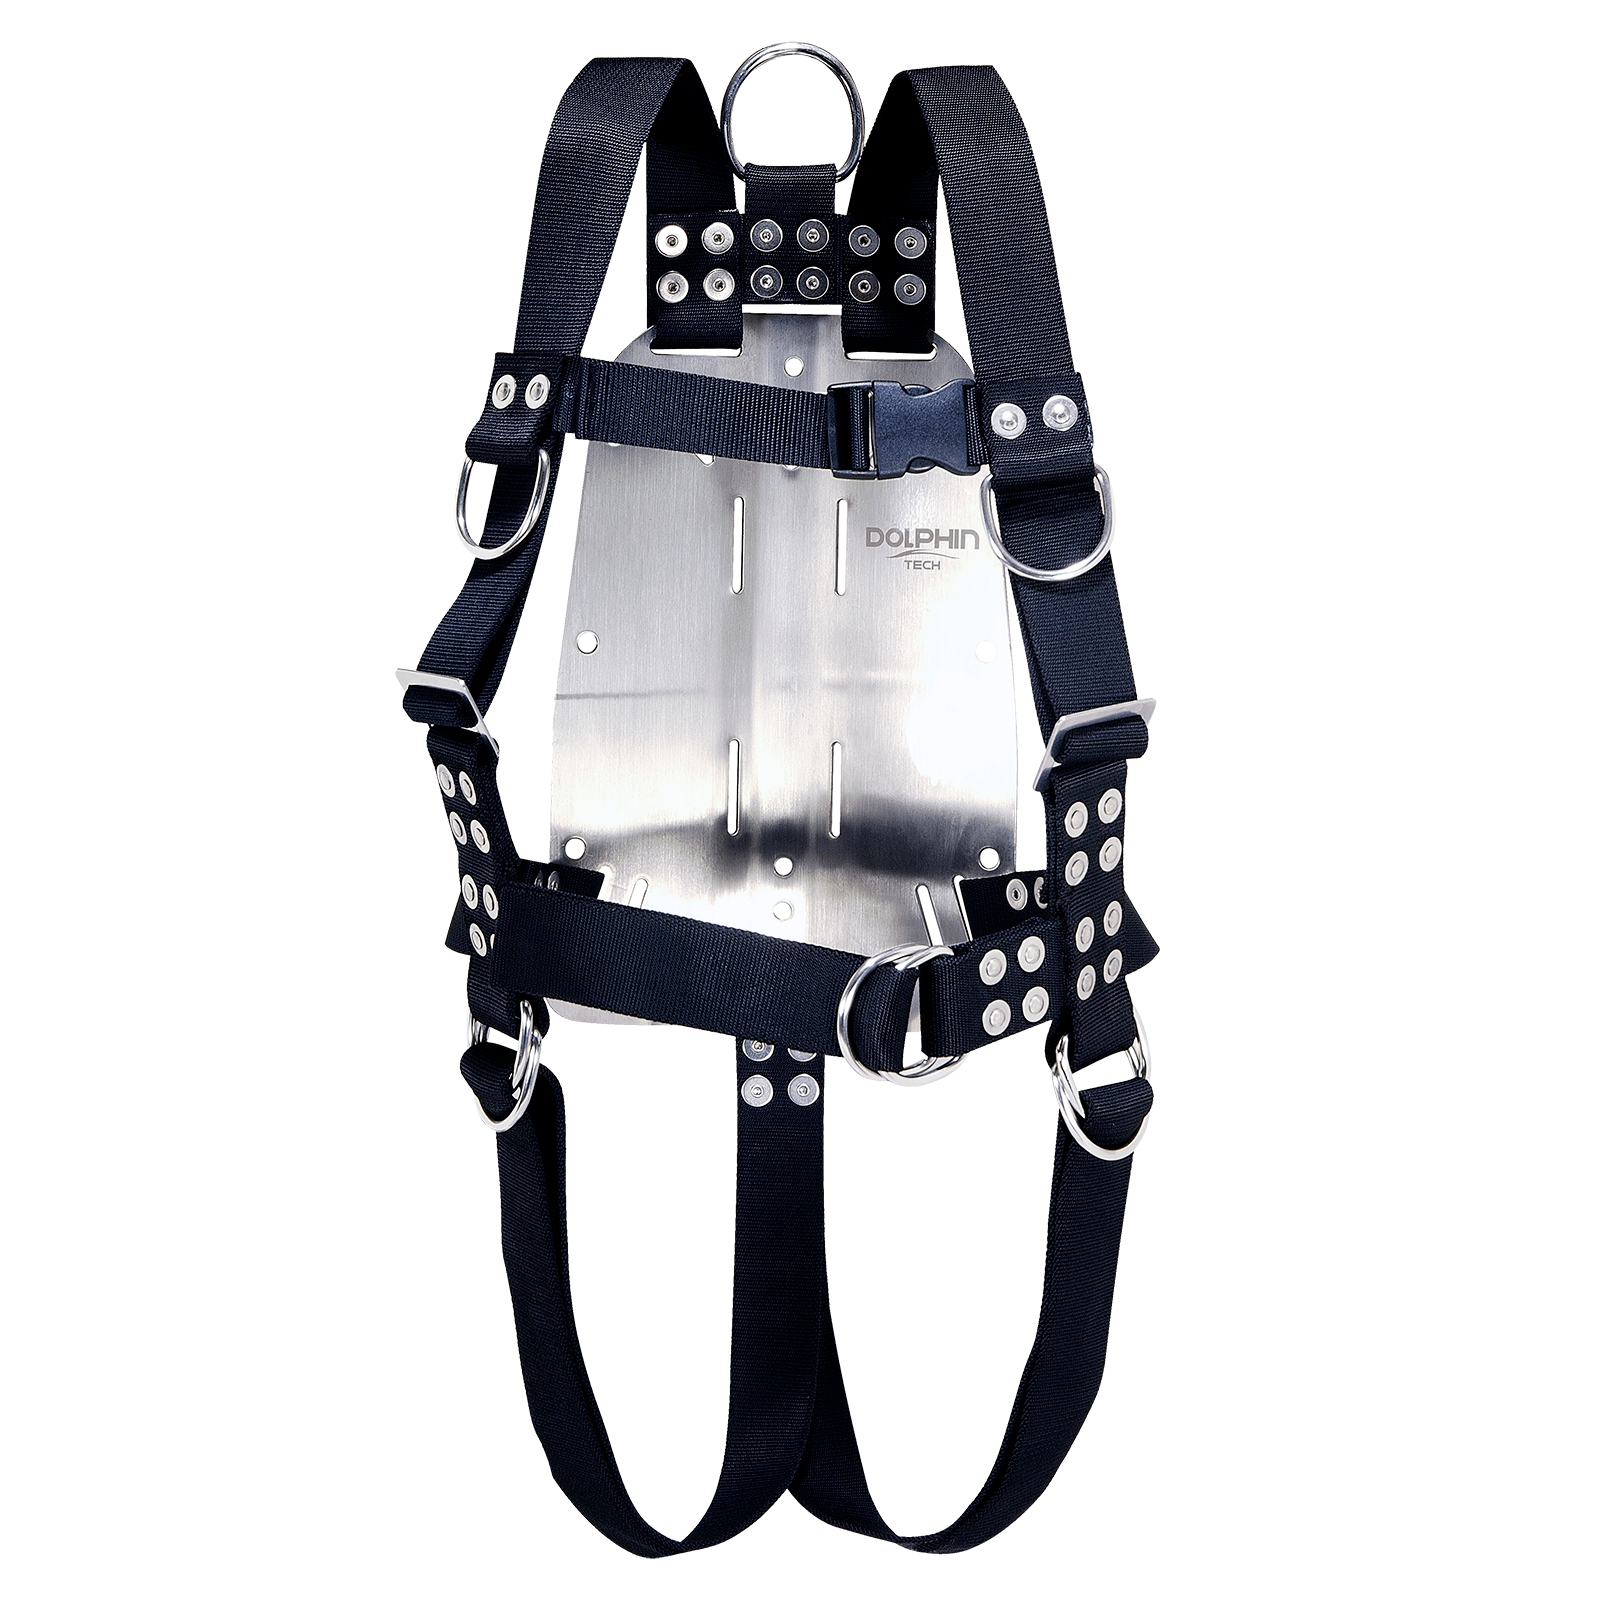 Commercial diving bell harness